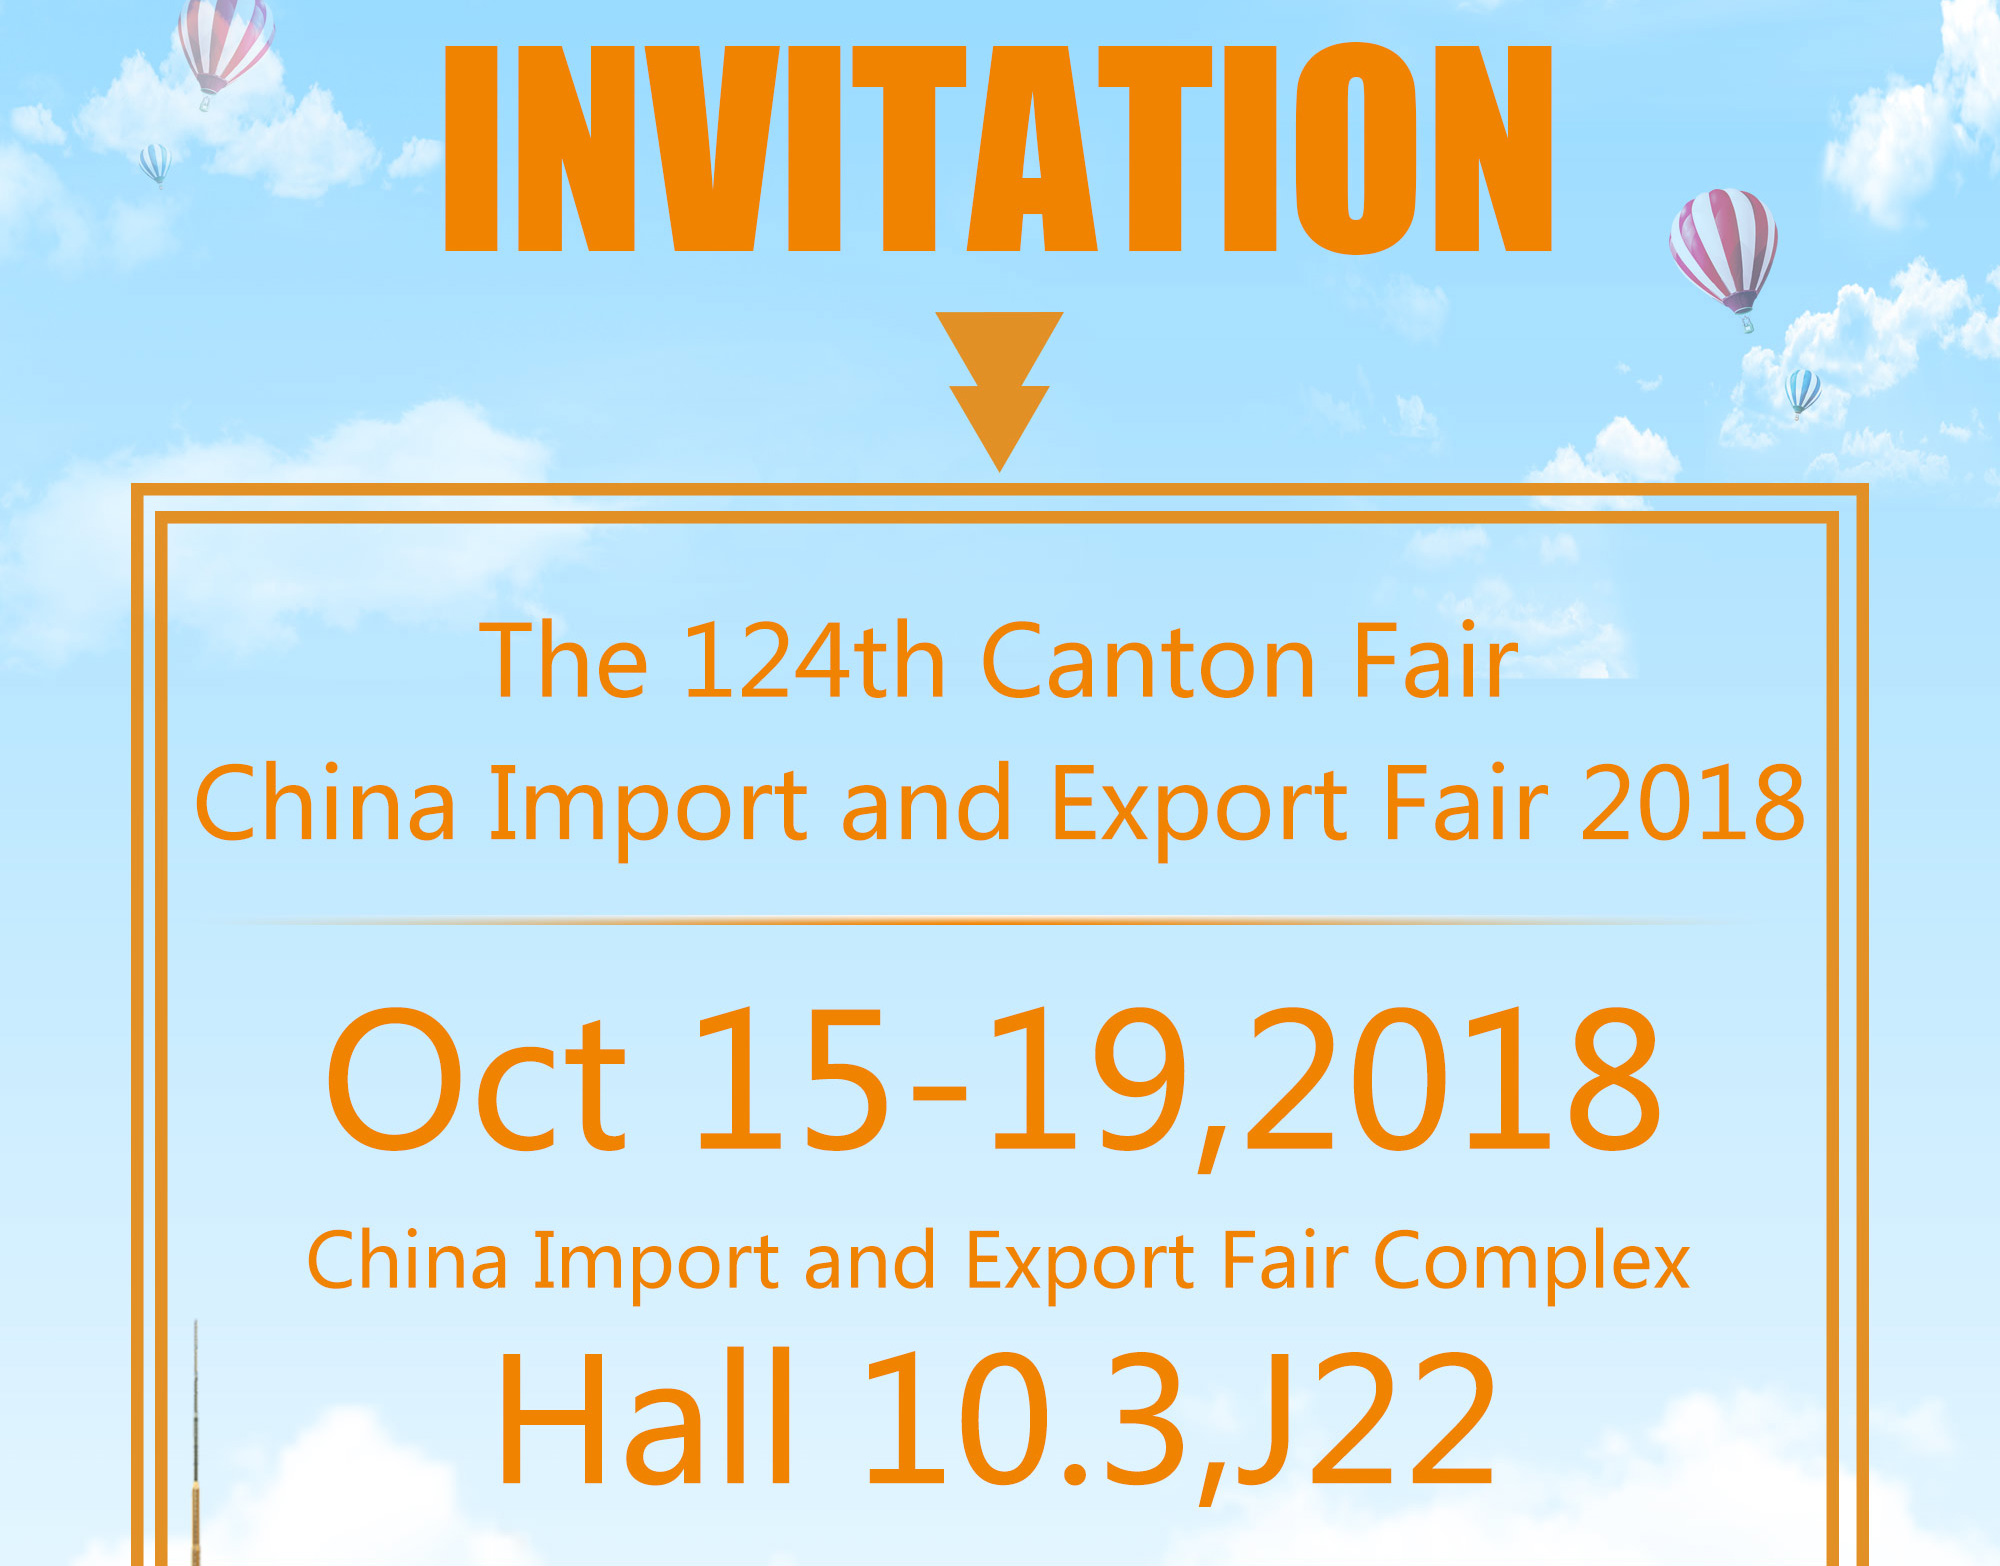 The 124th Canton Fair China Import and Export Fair 2018